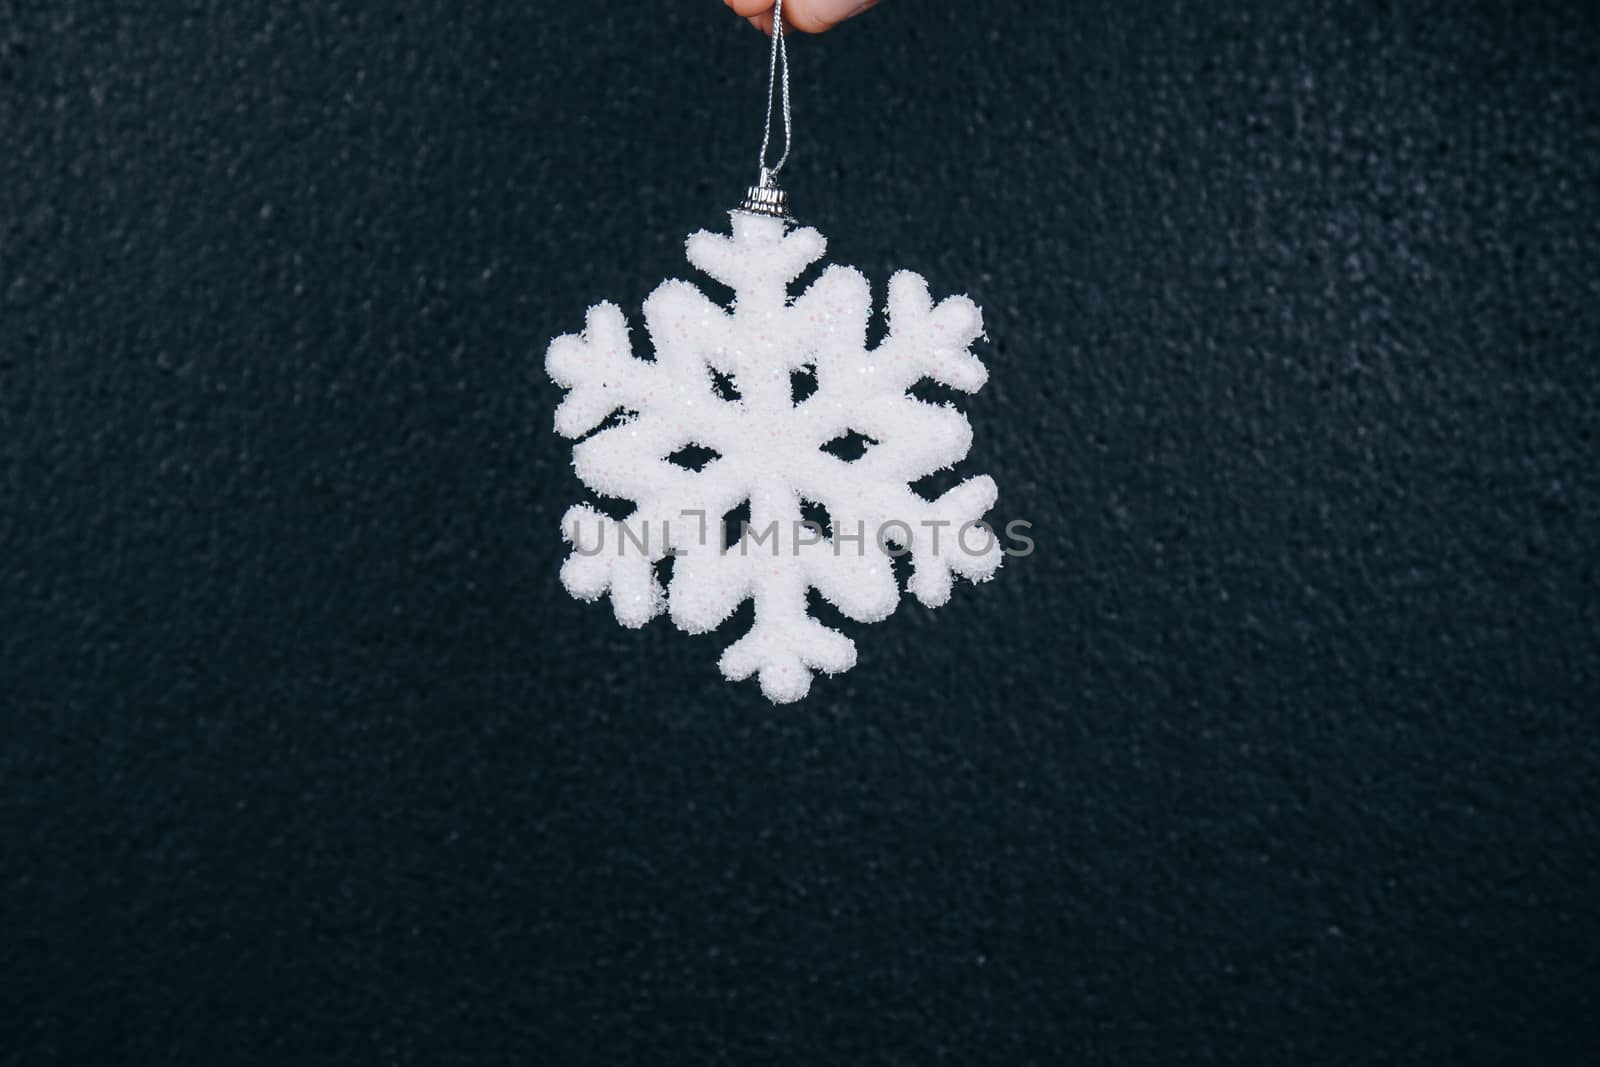 woman hand holding hanging snowflake toy for christmas decoration isolated on black background. new year gift card.